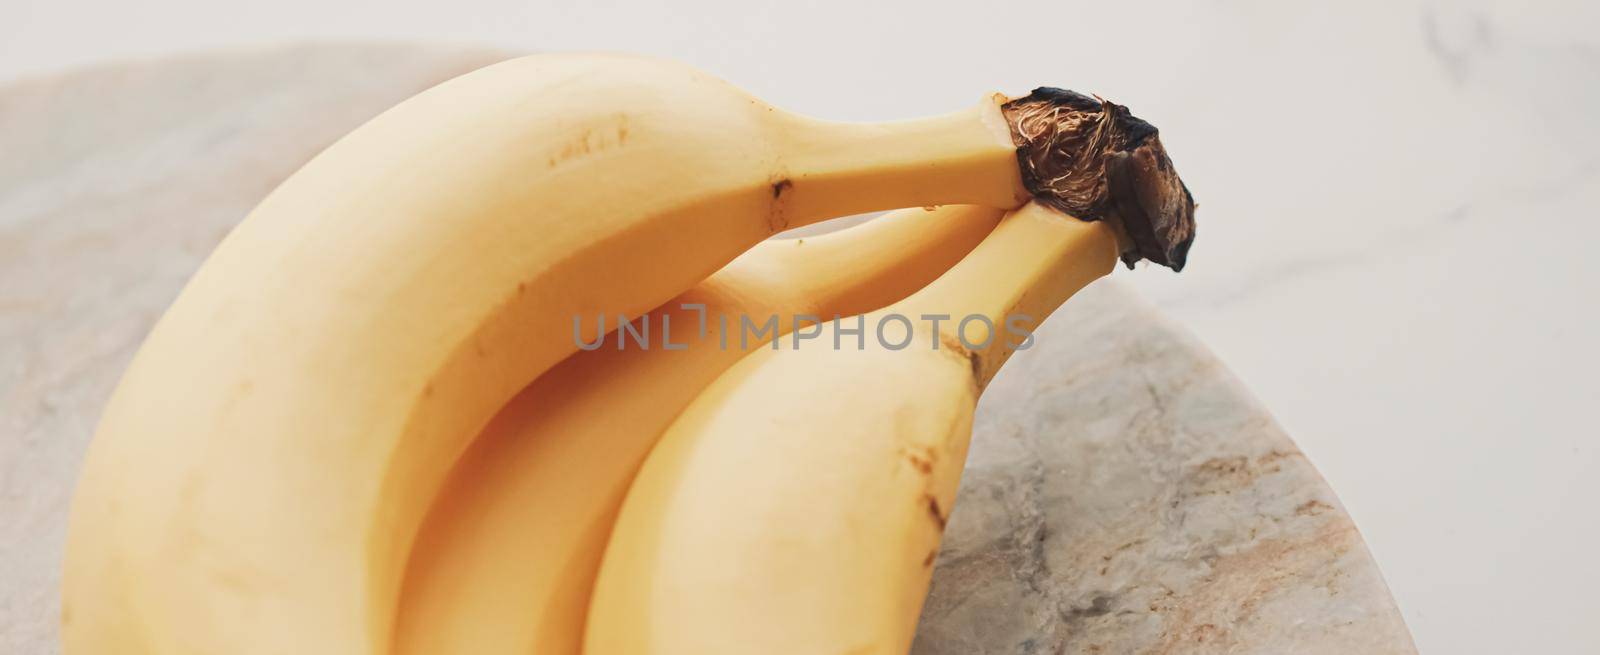 Fresh ripe bananas as healthy food, organic fruits and diet concept